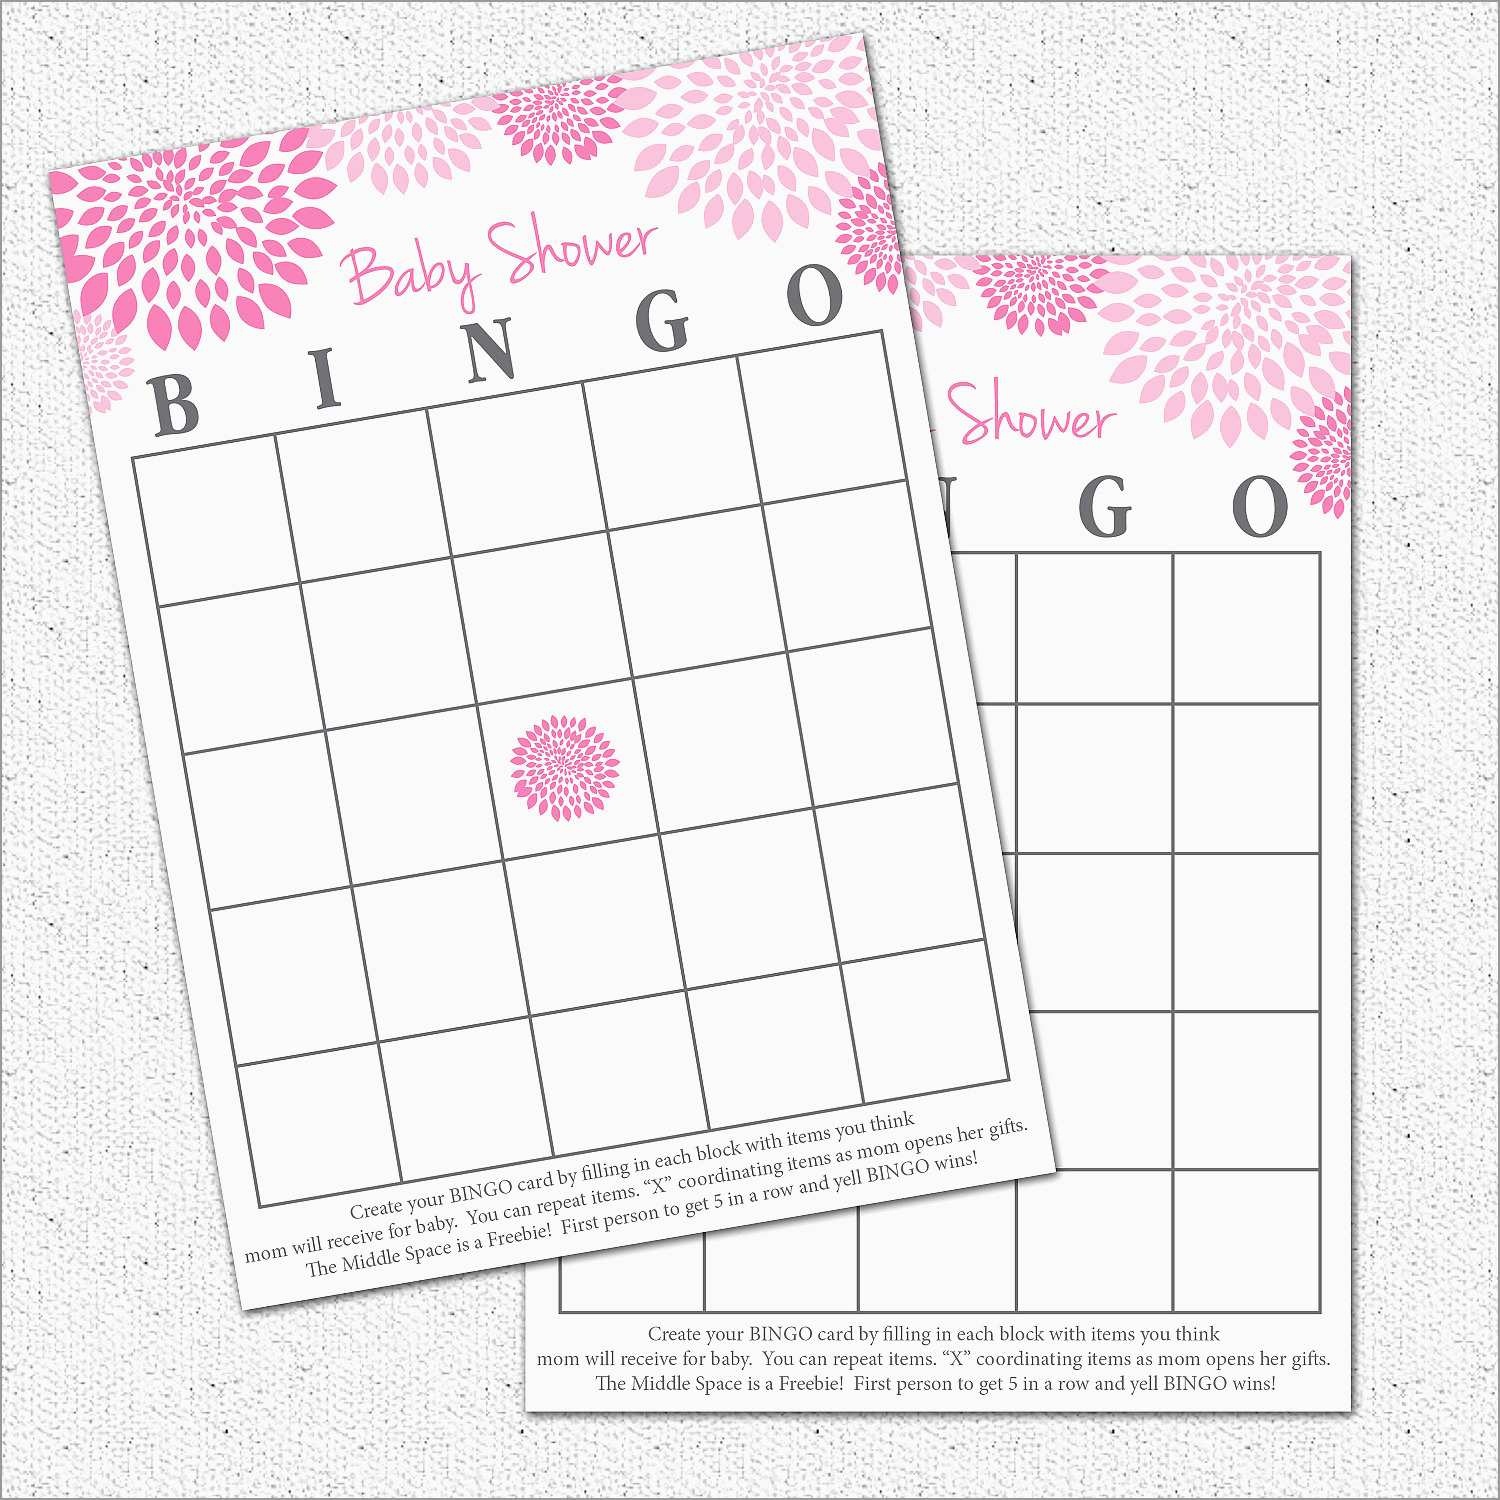 Awesome Free Baby Shower Bingo Blank Template | Best Of Template - Free Printable Baby Shower Bingo Blank Cards